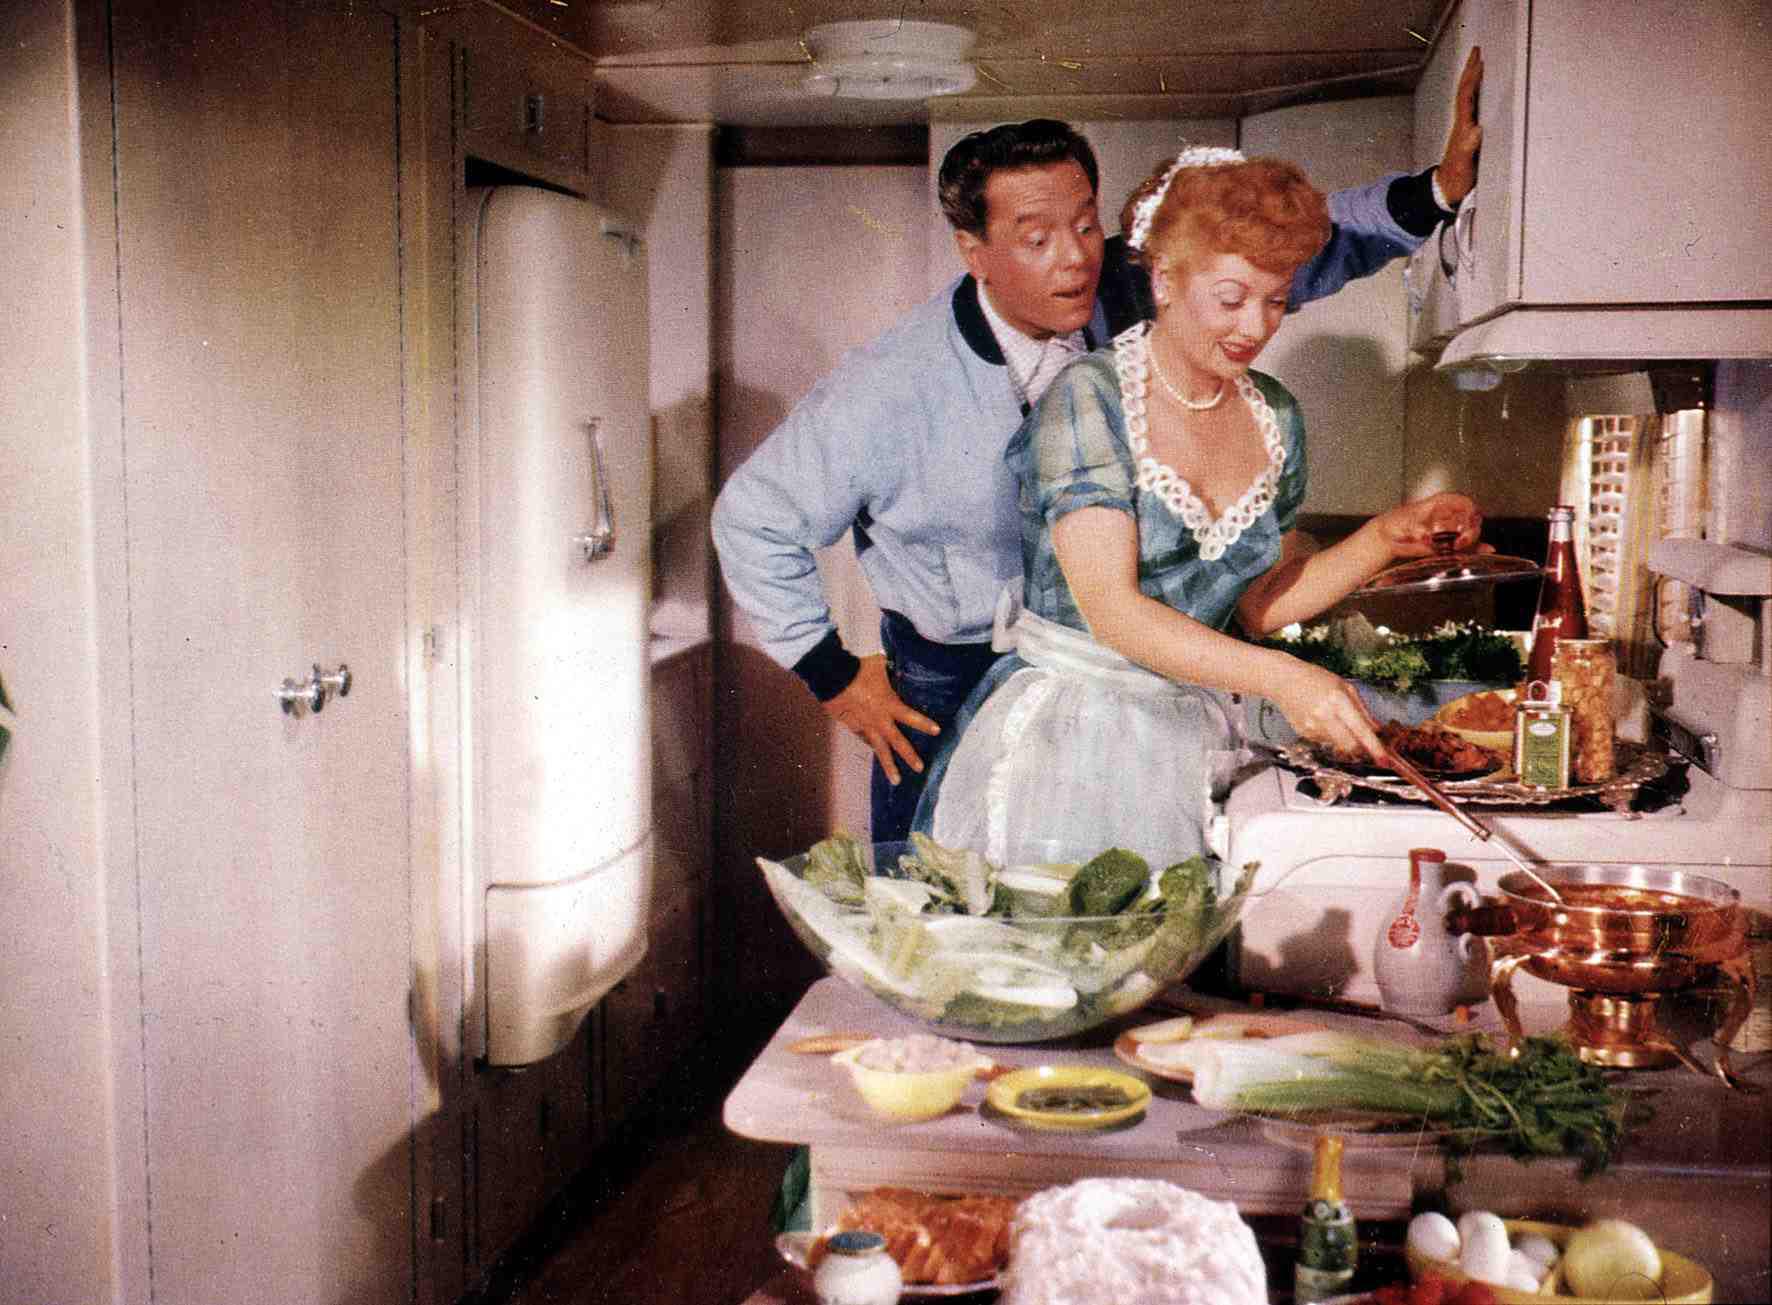 Desi Arnaz and Lucille Ball | FilmPublicityArchive/United Archives via Getty Images